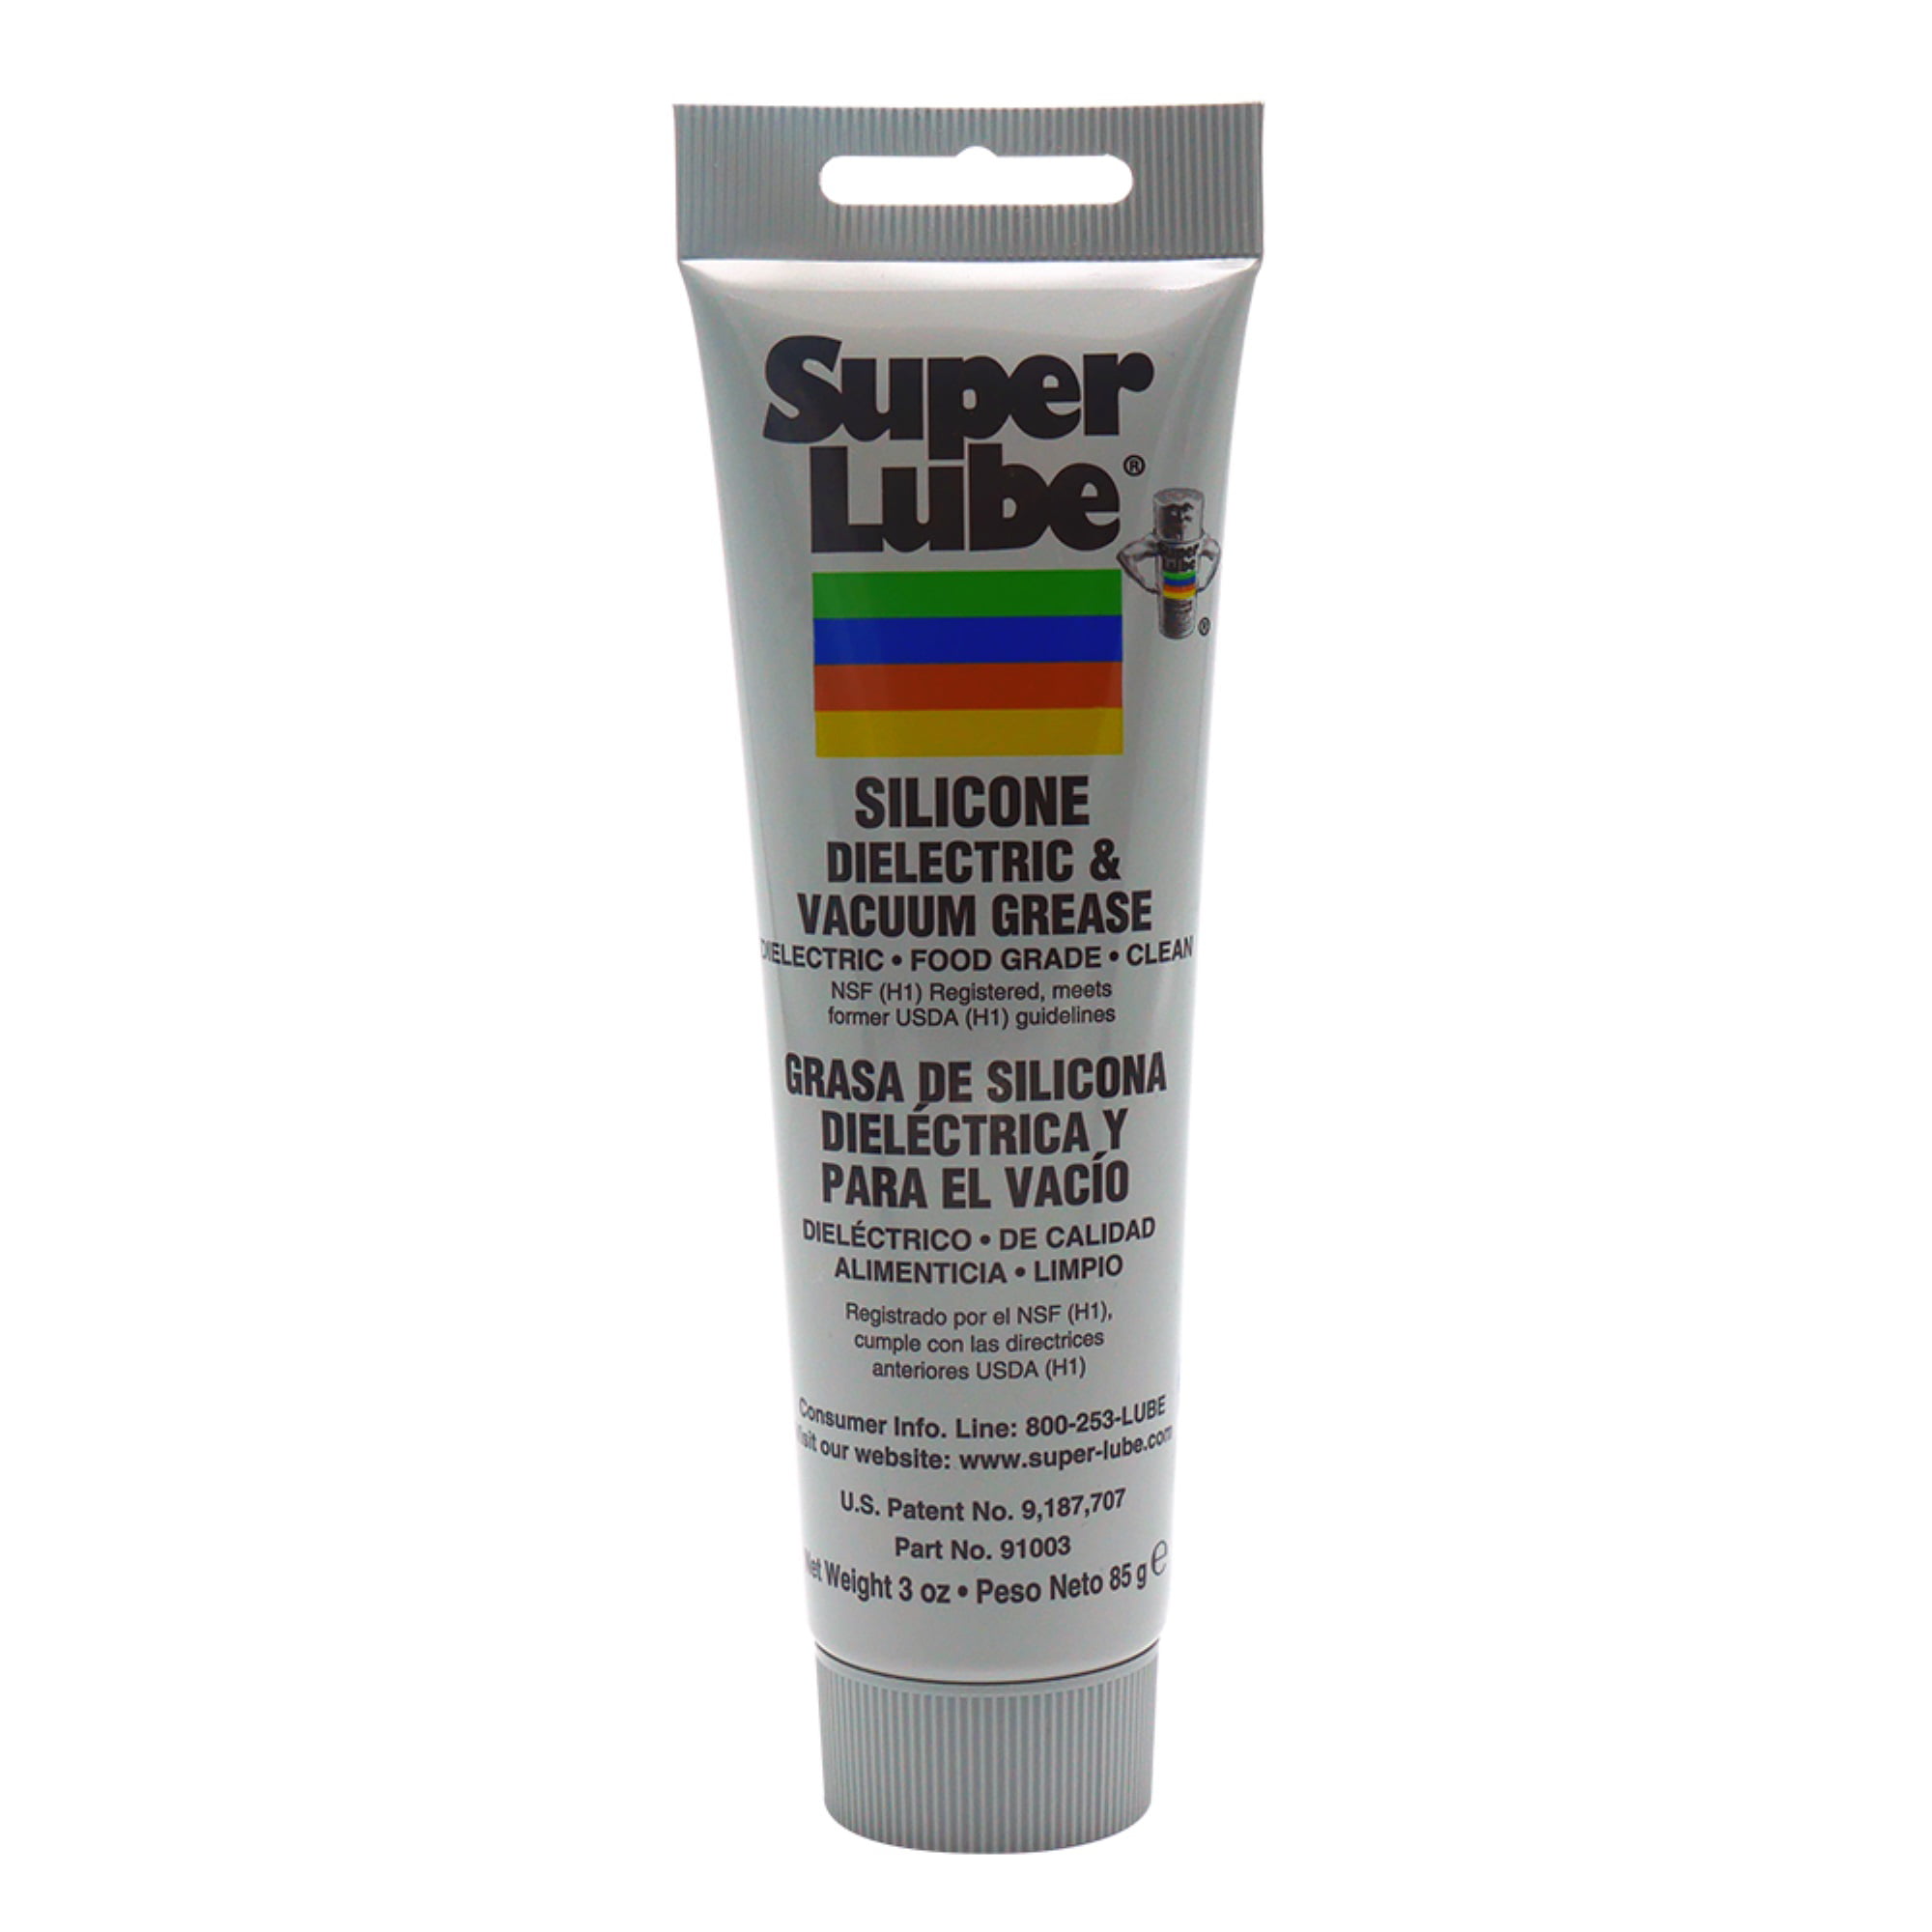  Super Lube Grease Dielectric, Synthetic 3 Oz. Usda Authorized  Tube 3 pack : Automotive